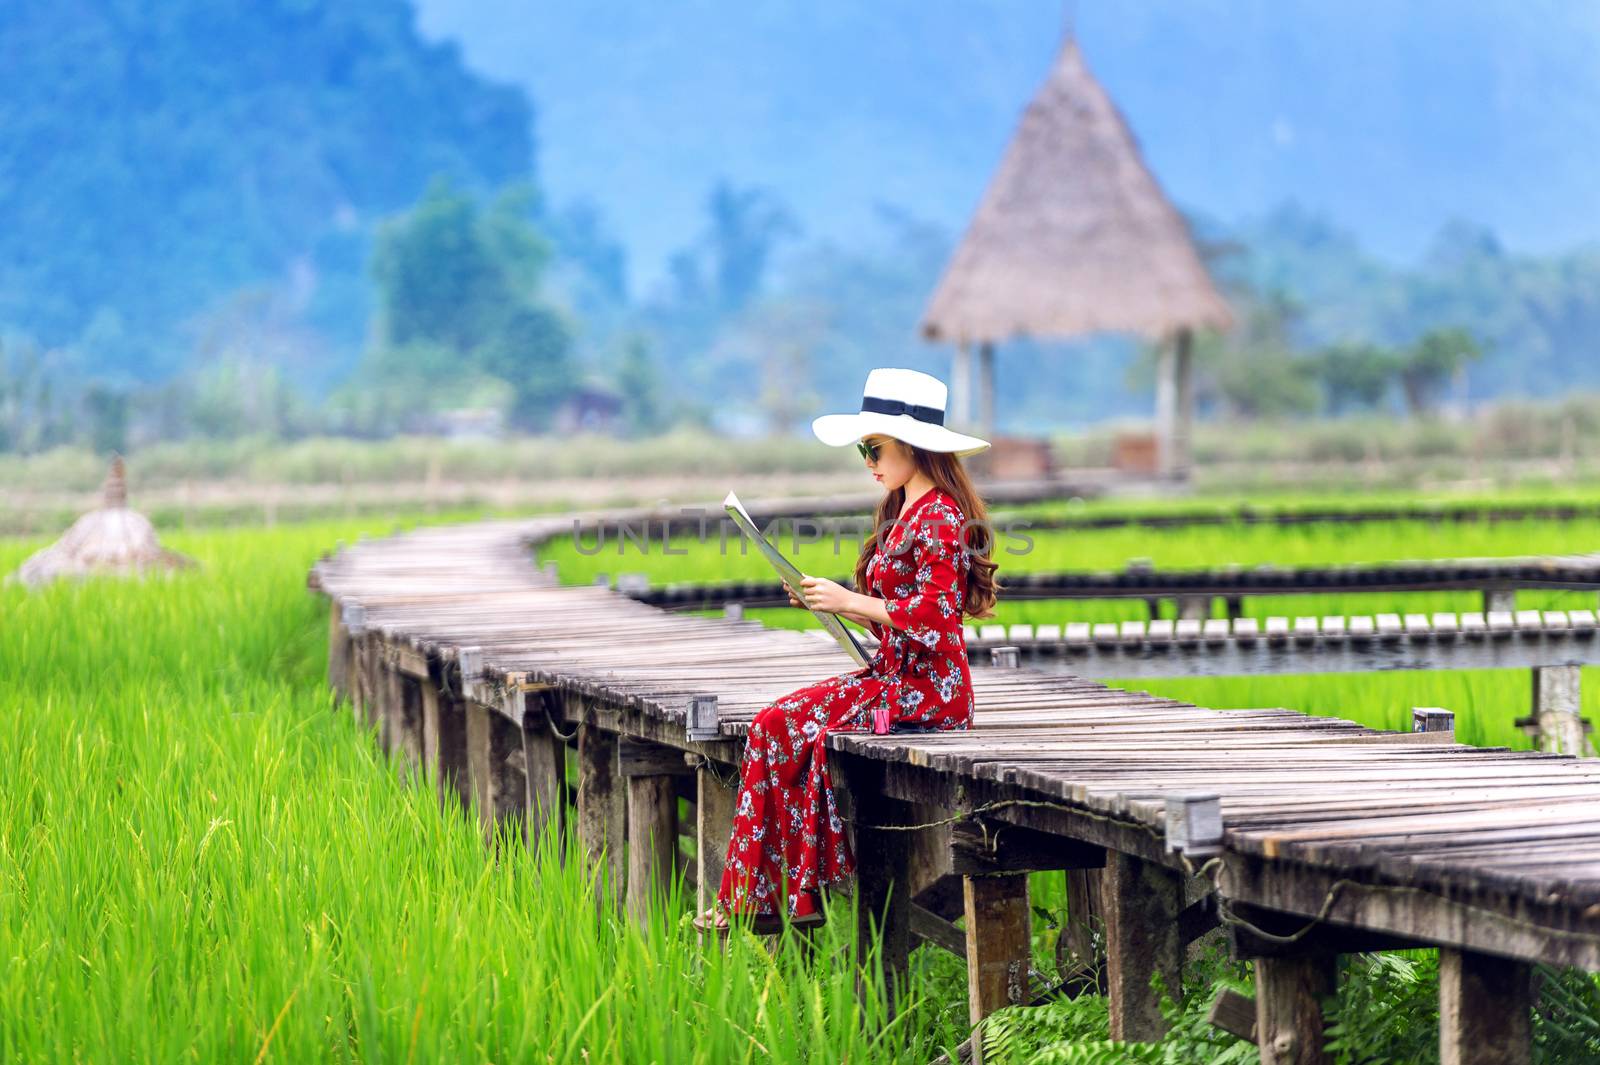 Young woman sitting on wooden path with green rice field in Vang Vieng, Laos. by gutarphotoghaphy